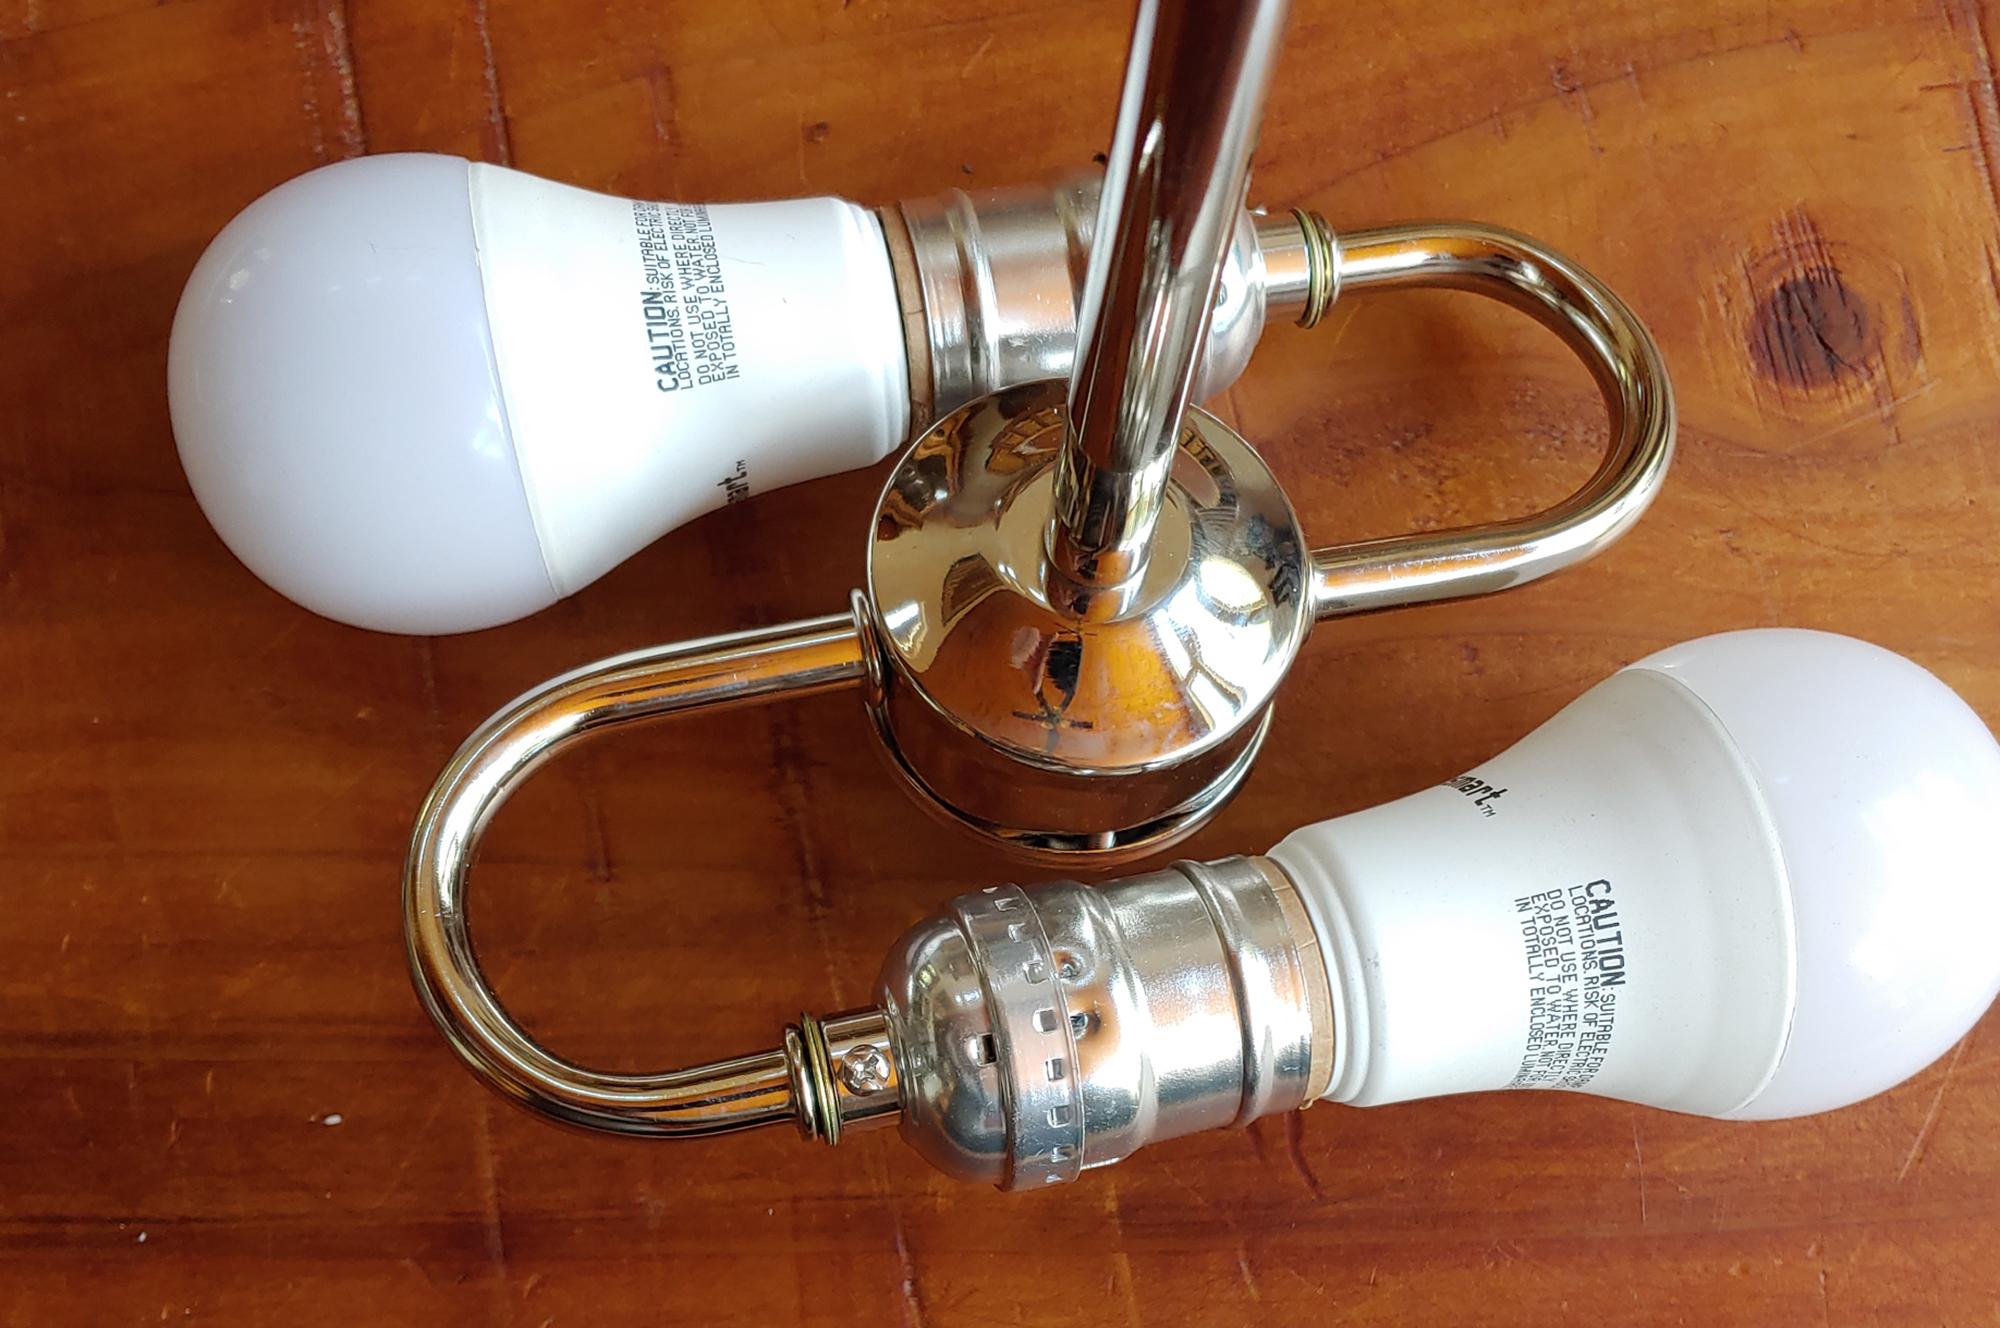 Two bulb fixture upgrade
Offered in a choice of in White, Black, Bronze or Satin Nickle.